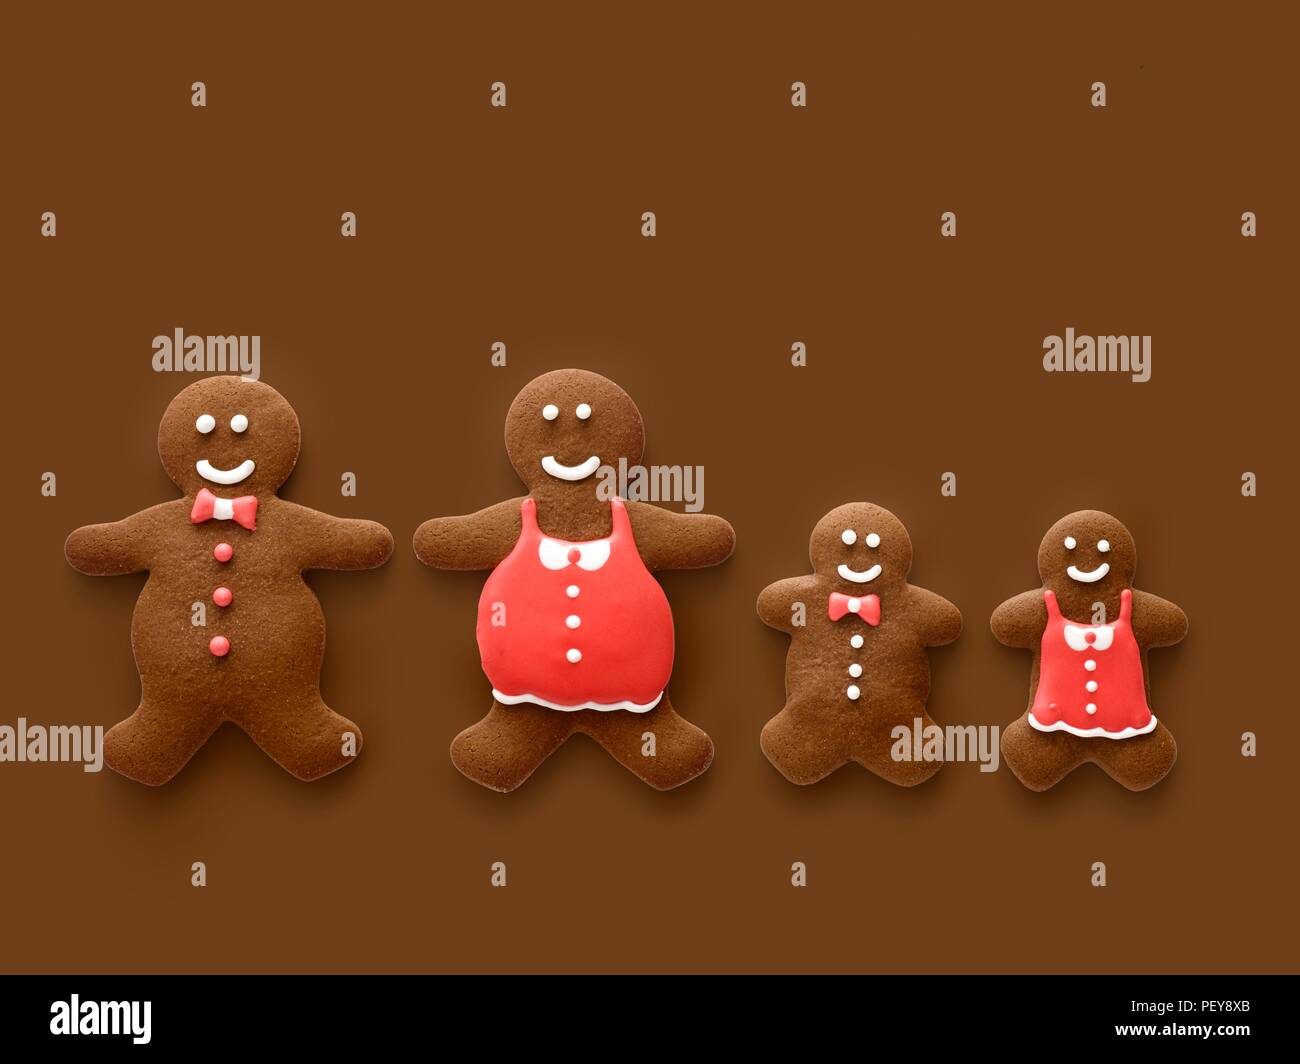 Gingerbread family. Stock Photo